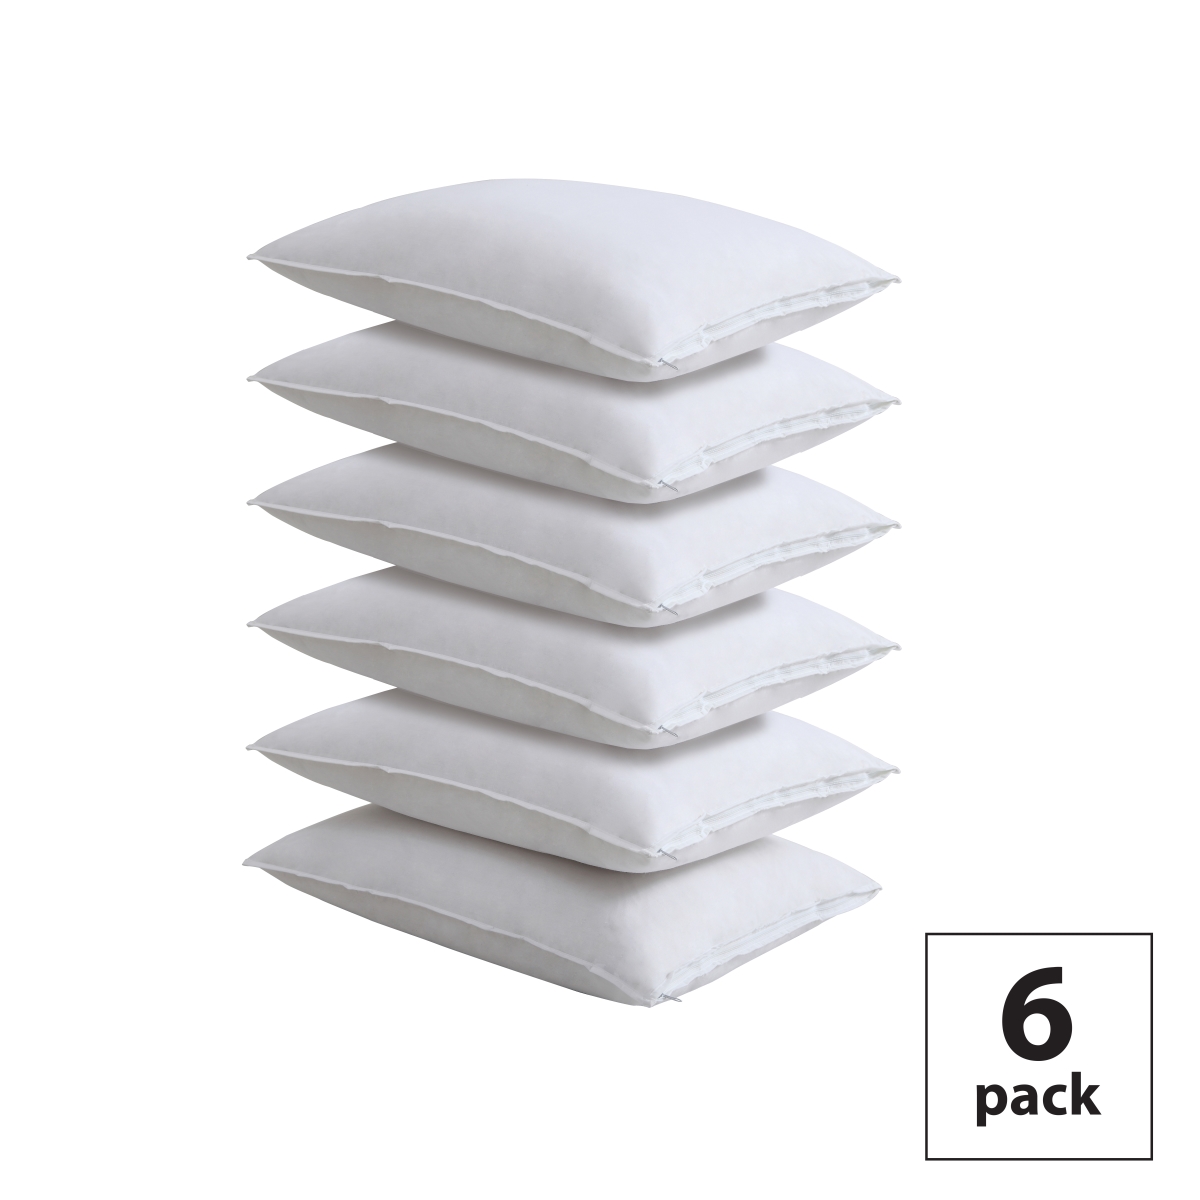 Fre10306whit07 Allergy Relief Pillow Protector Set, Standard Size - Pack Of 6